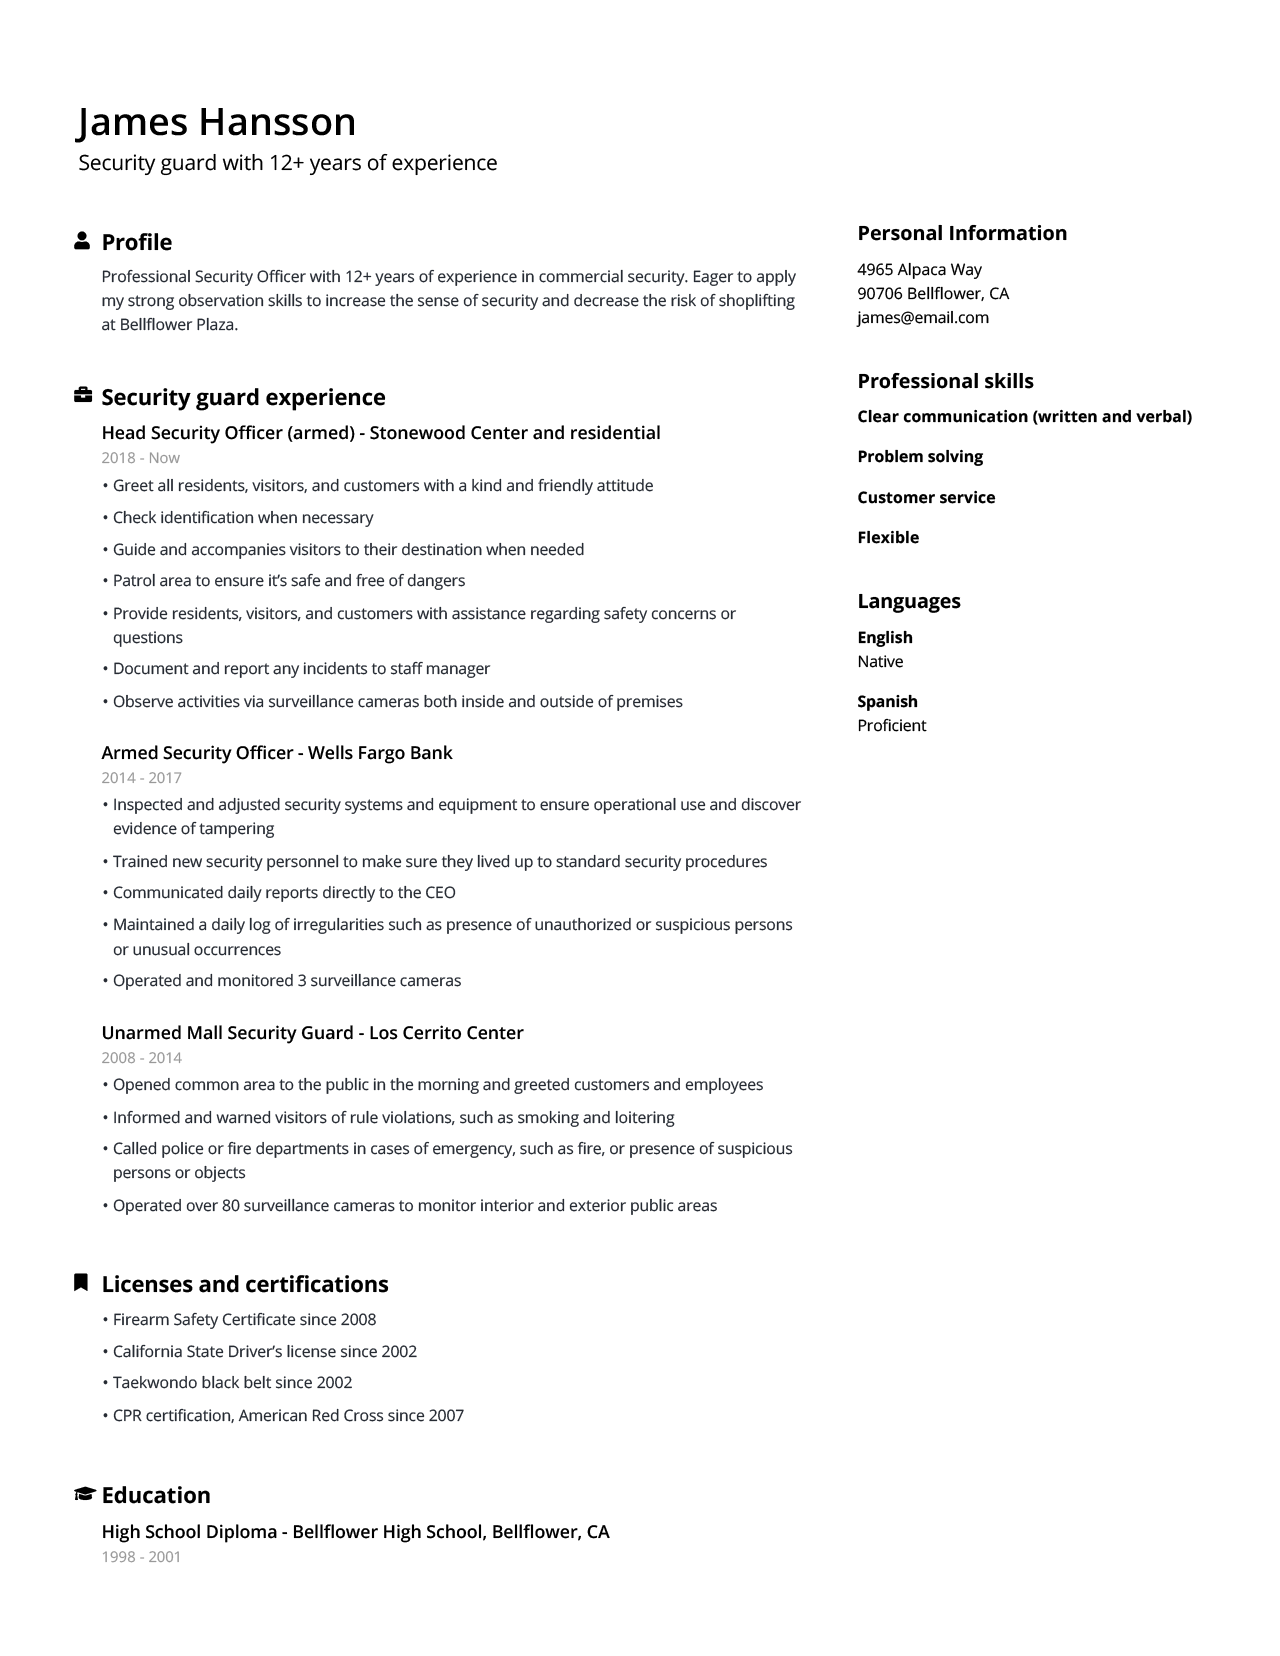 how to make resume for security guard job